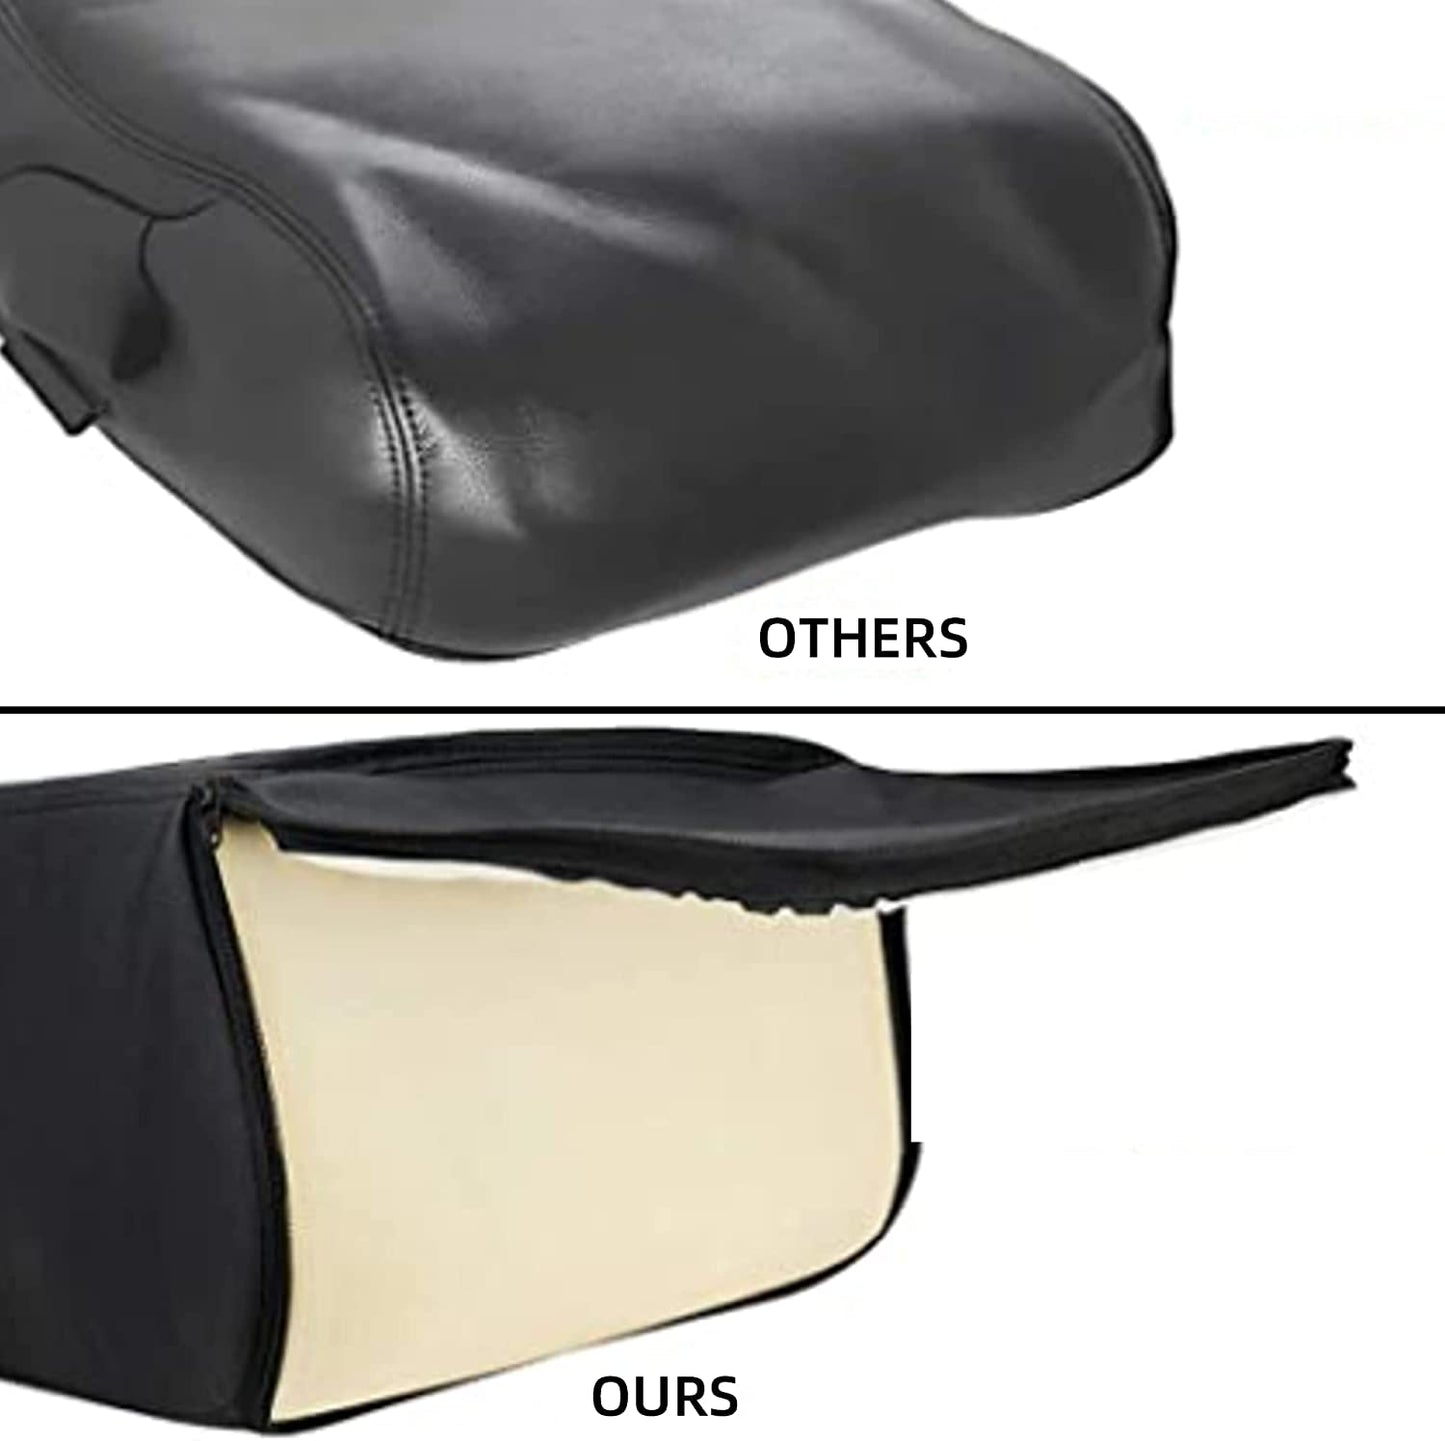 07-13 Chevy GMC Jump Seat Armrest Cover with Zipper Design Center Console Cover (Black)